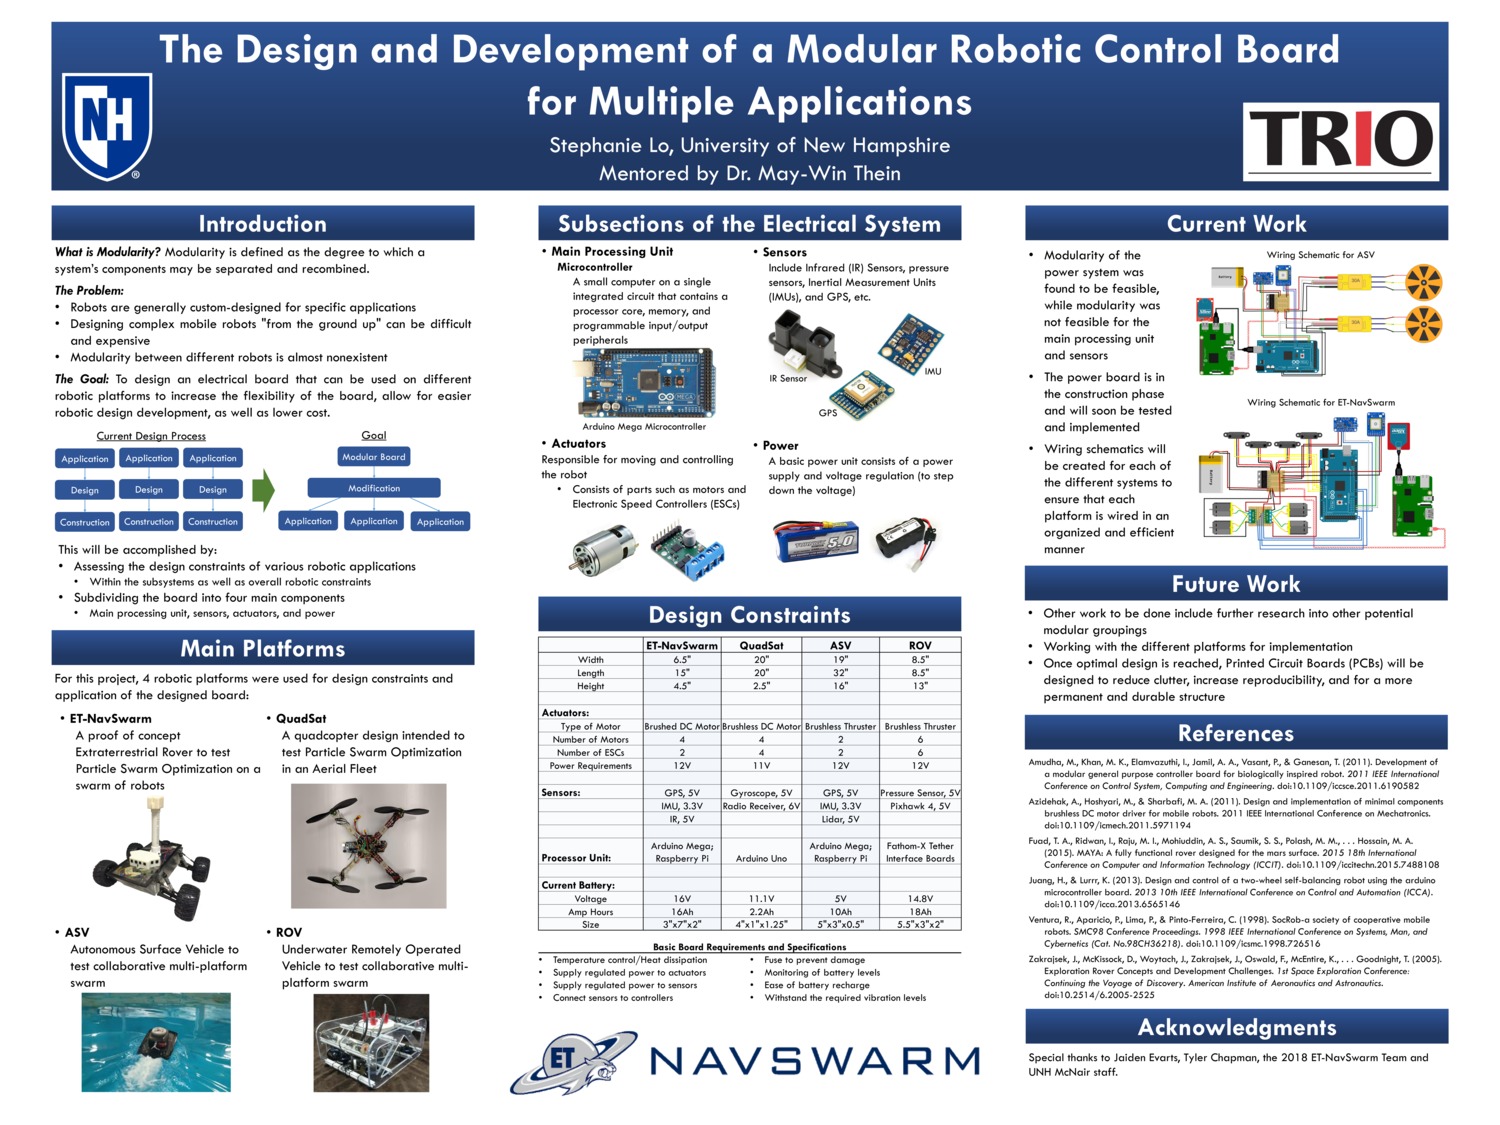 The Design And Development Of A Modular Robotic Control Board For Multiple Applications by sl2001